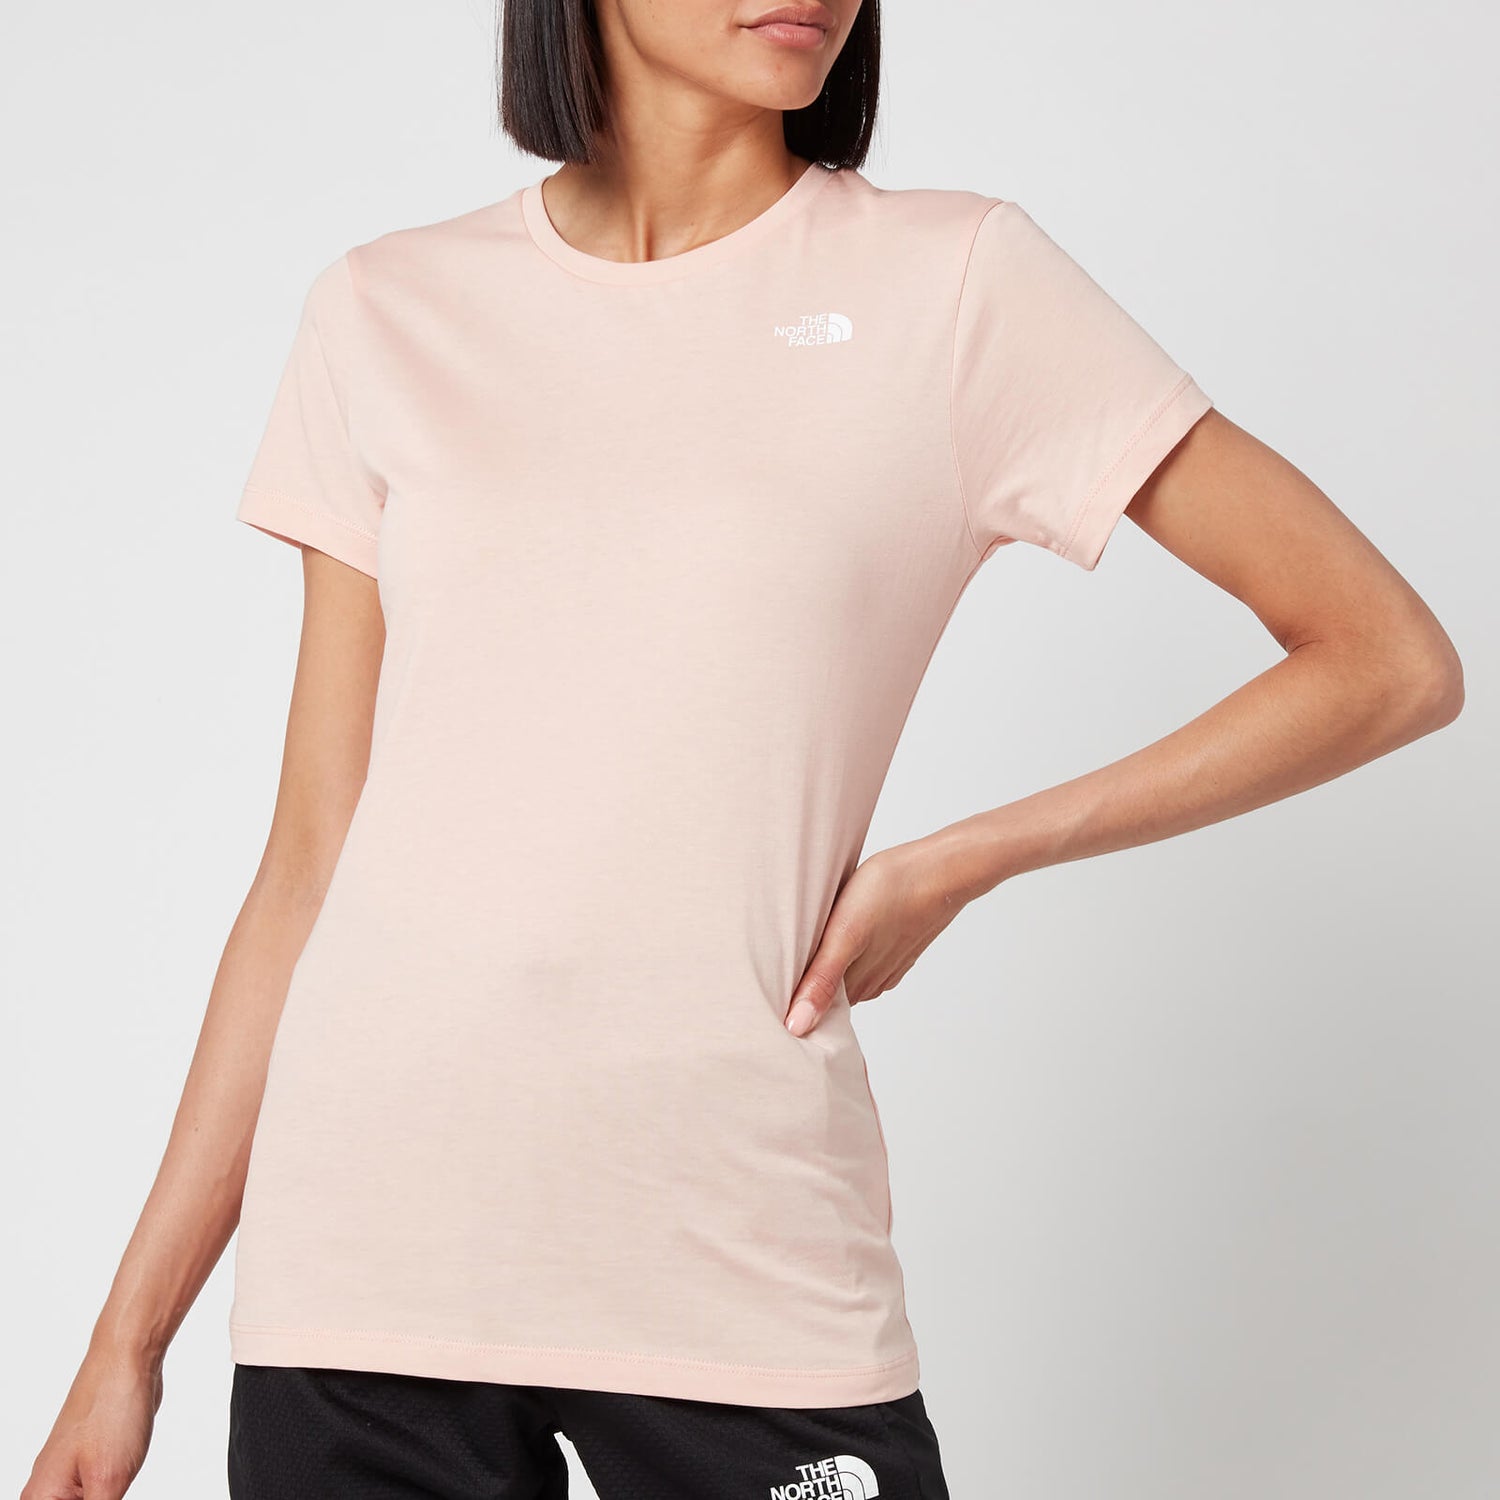 The North Face Women's Simple Dome Short Sleeve T-Shirt - Evening Sand Pink